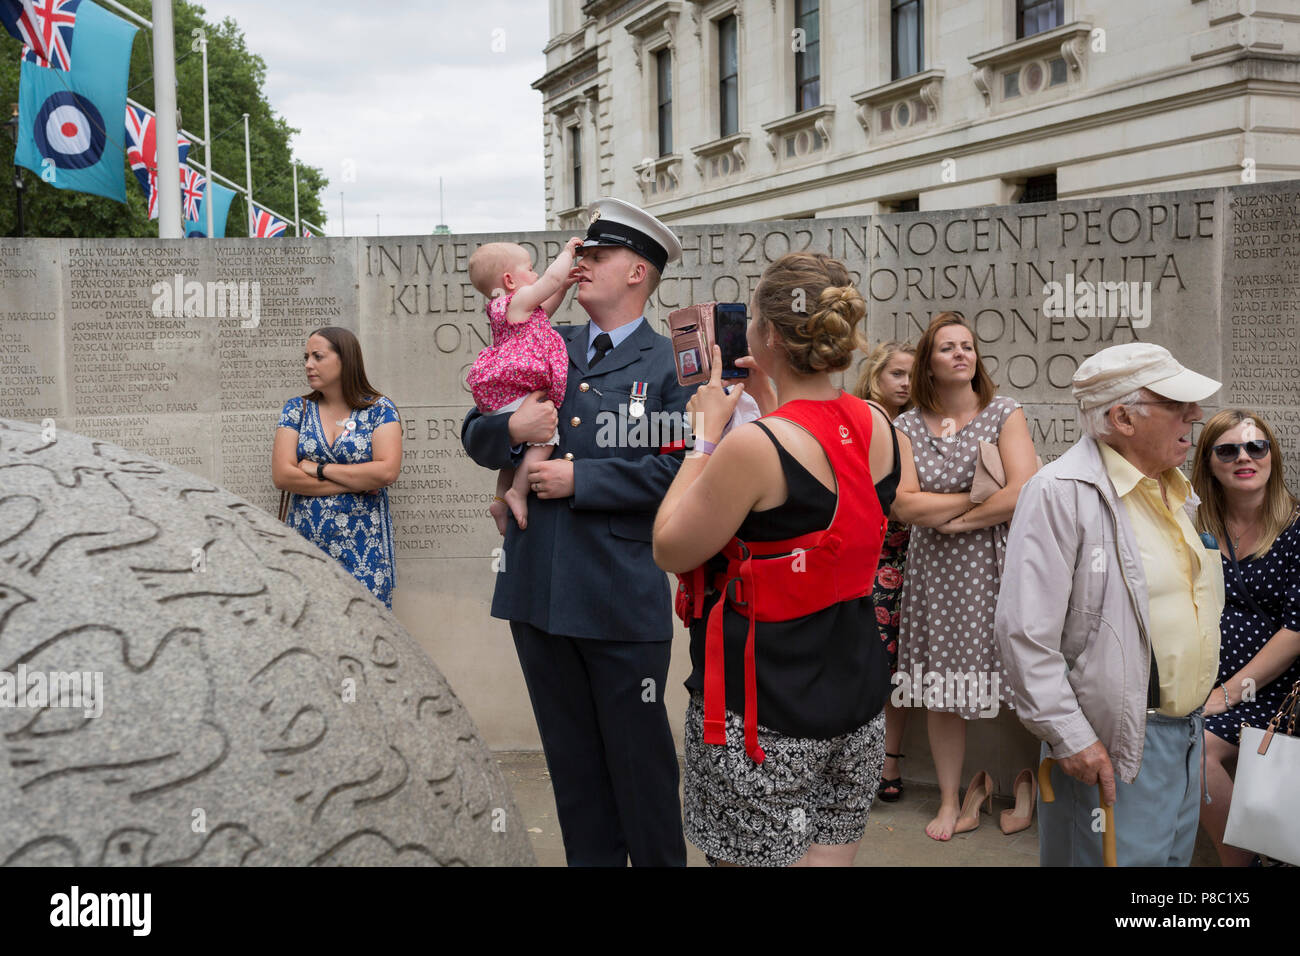 On the 100th anniversary of the Royal Air Force (RAF) and following a flypast of 100 aircraft formations representing Britain's air defence history which flew over central London, a serviceman holds his child next to the memorial to those killed in the 2002 Bali bombing, on 10th July 2018, in London, England. Stock Photo